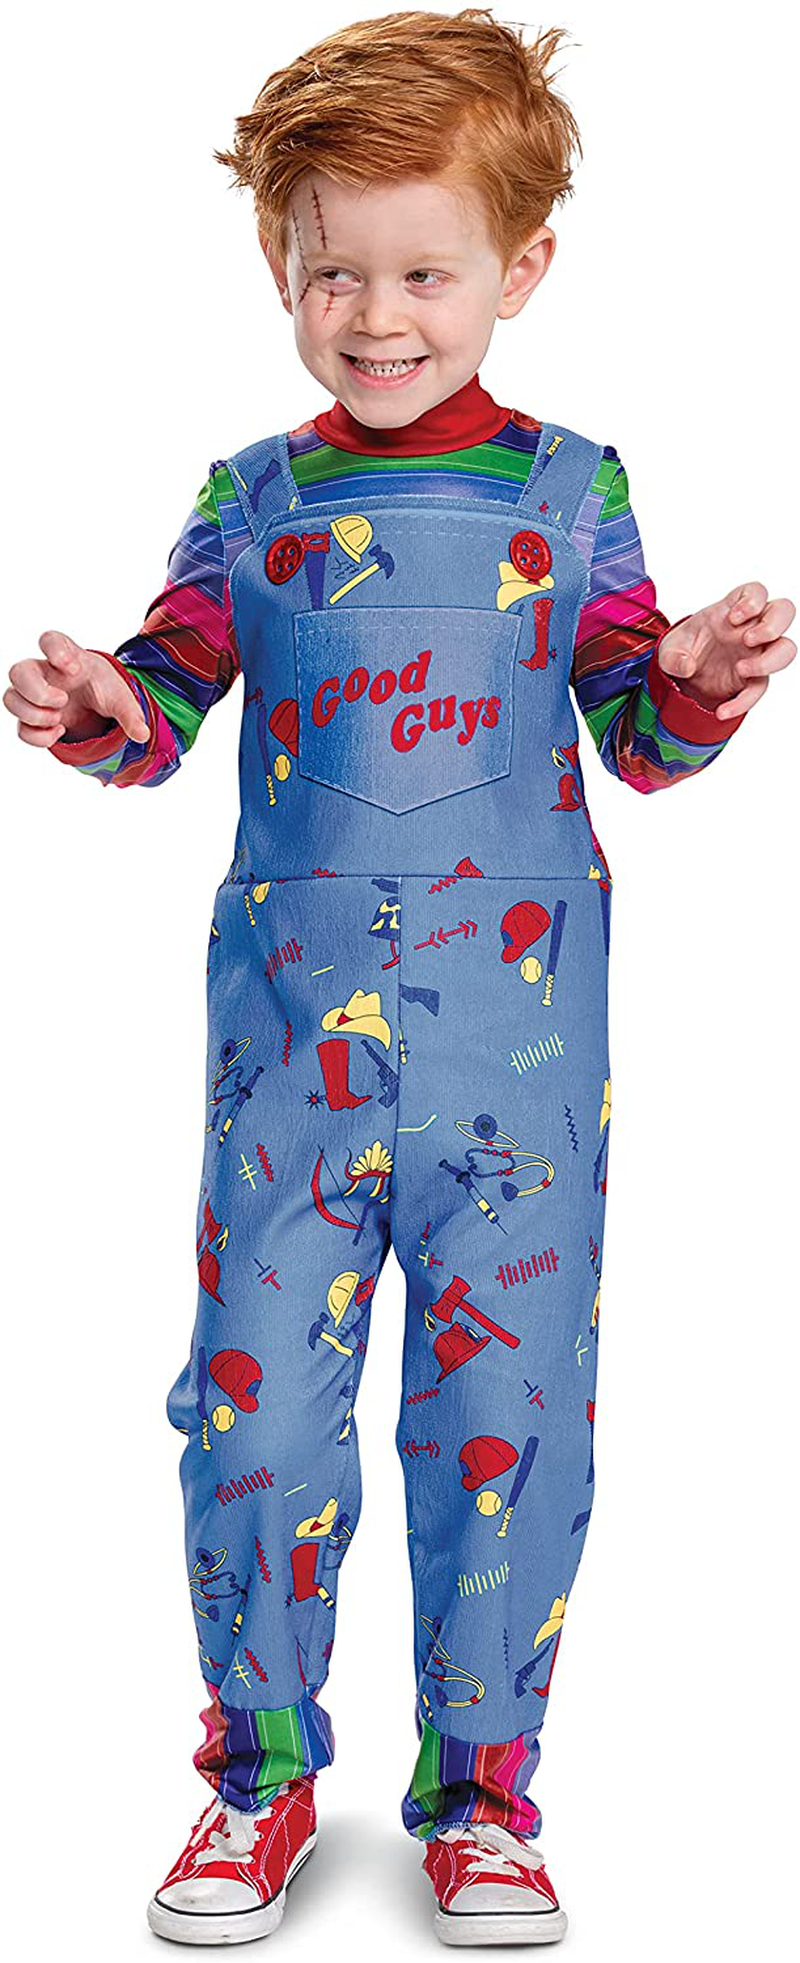 Chucky Costume for Kids, Official Childs Play Chucky Costume Jumpsuit Outfit, Classic Toddler Size